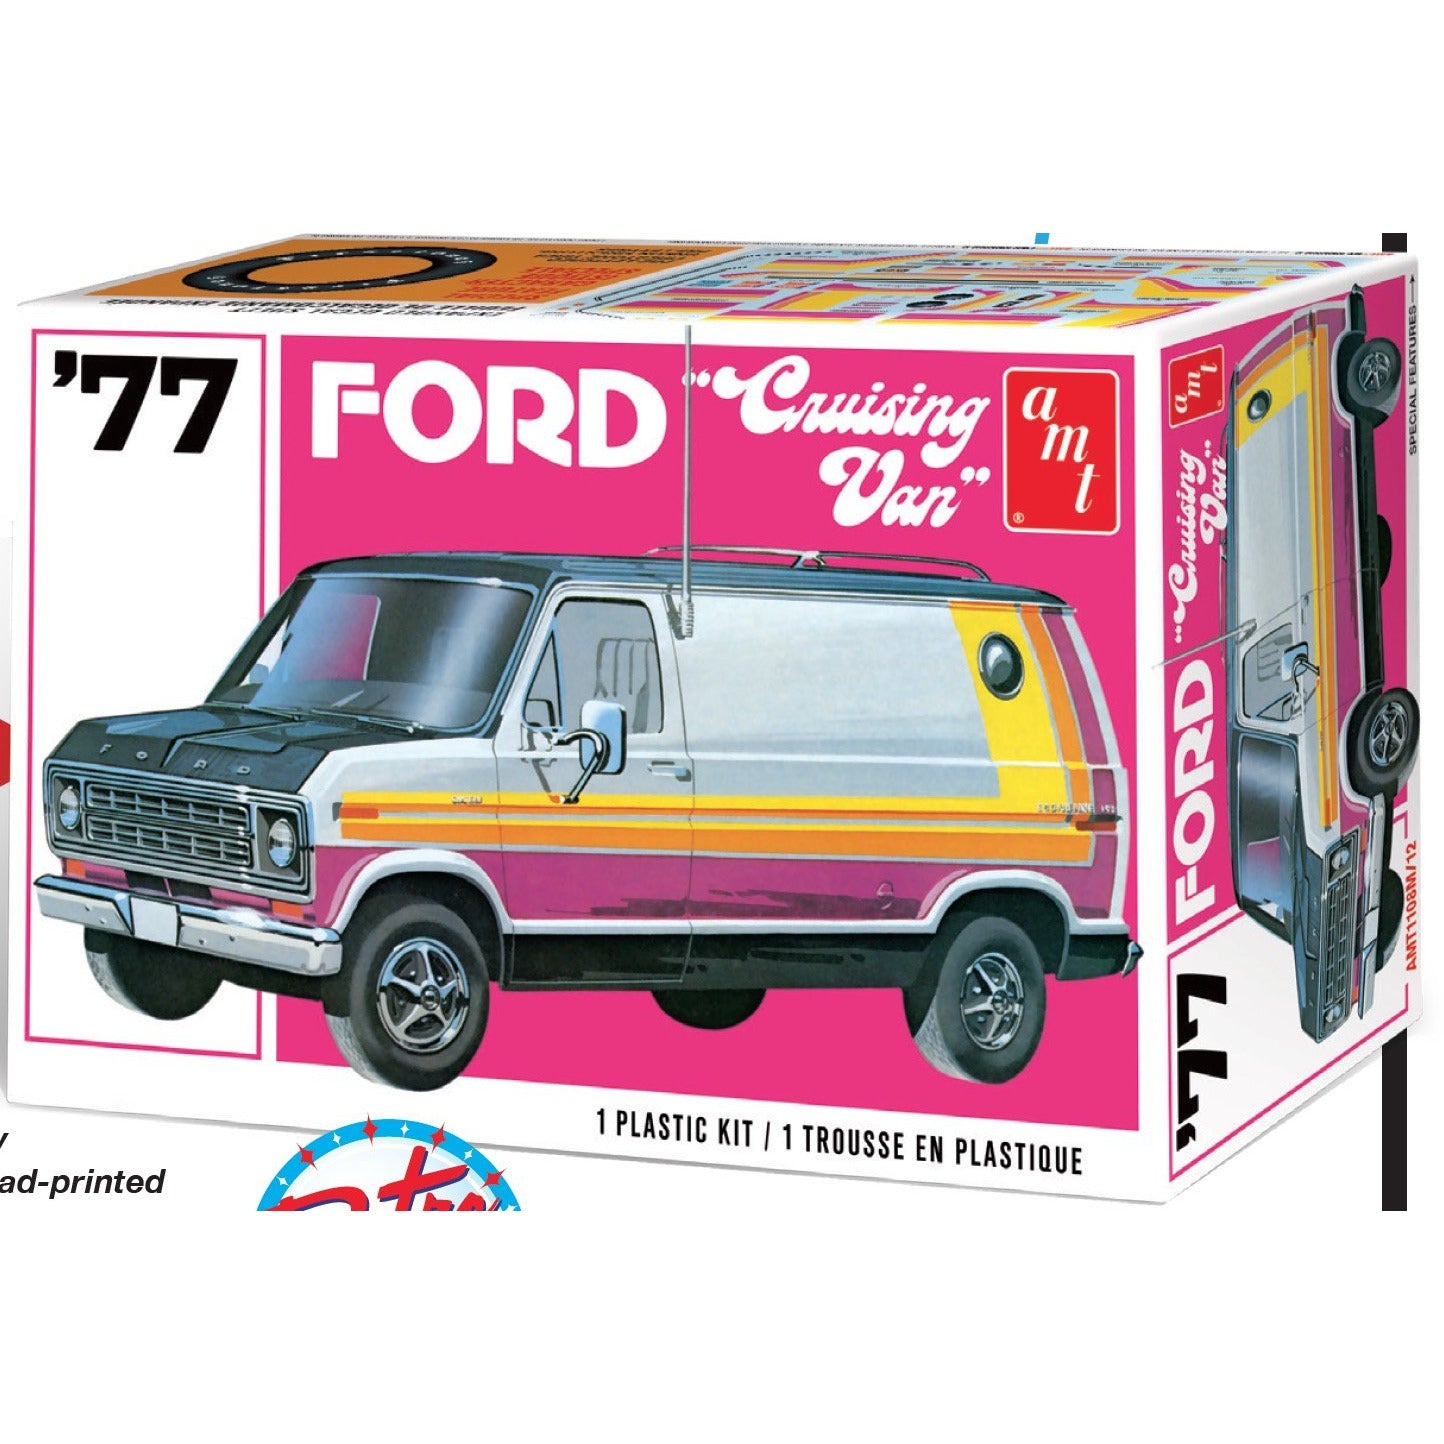 1977 Ford "Cruising Van" 1/25 by AMT